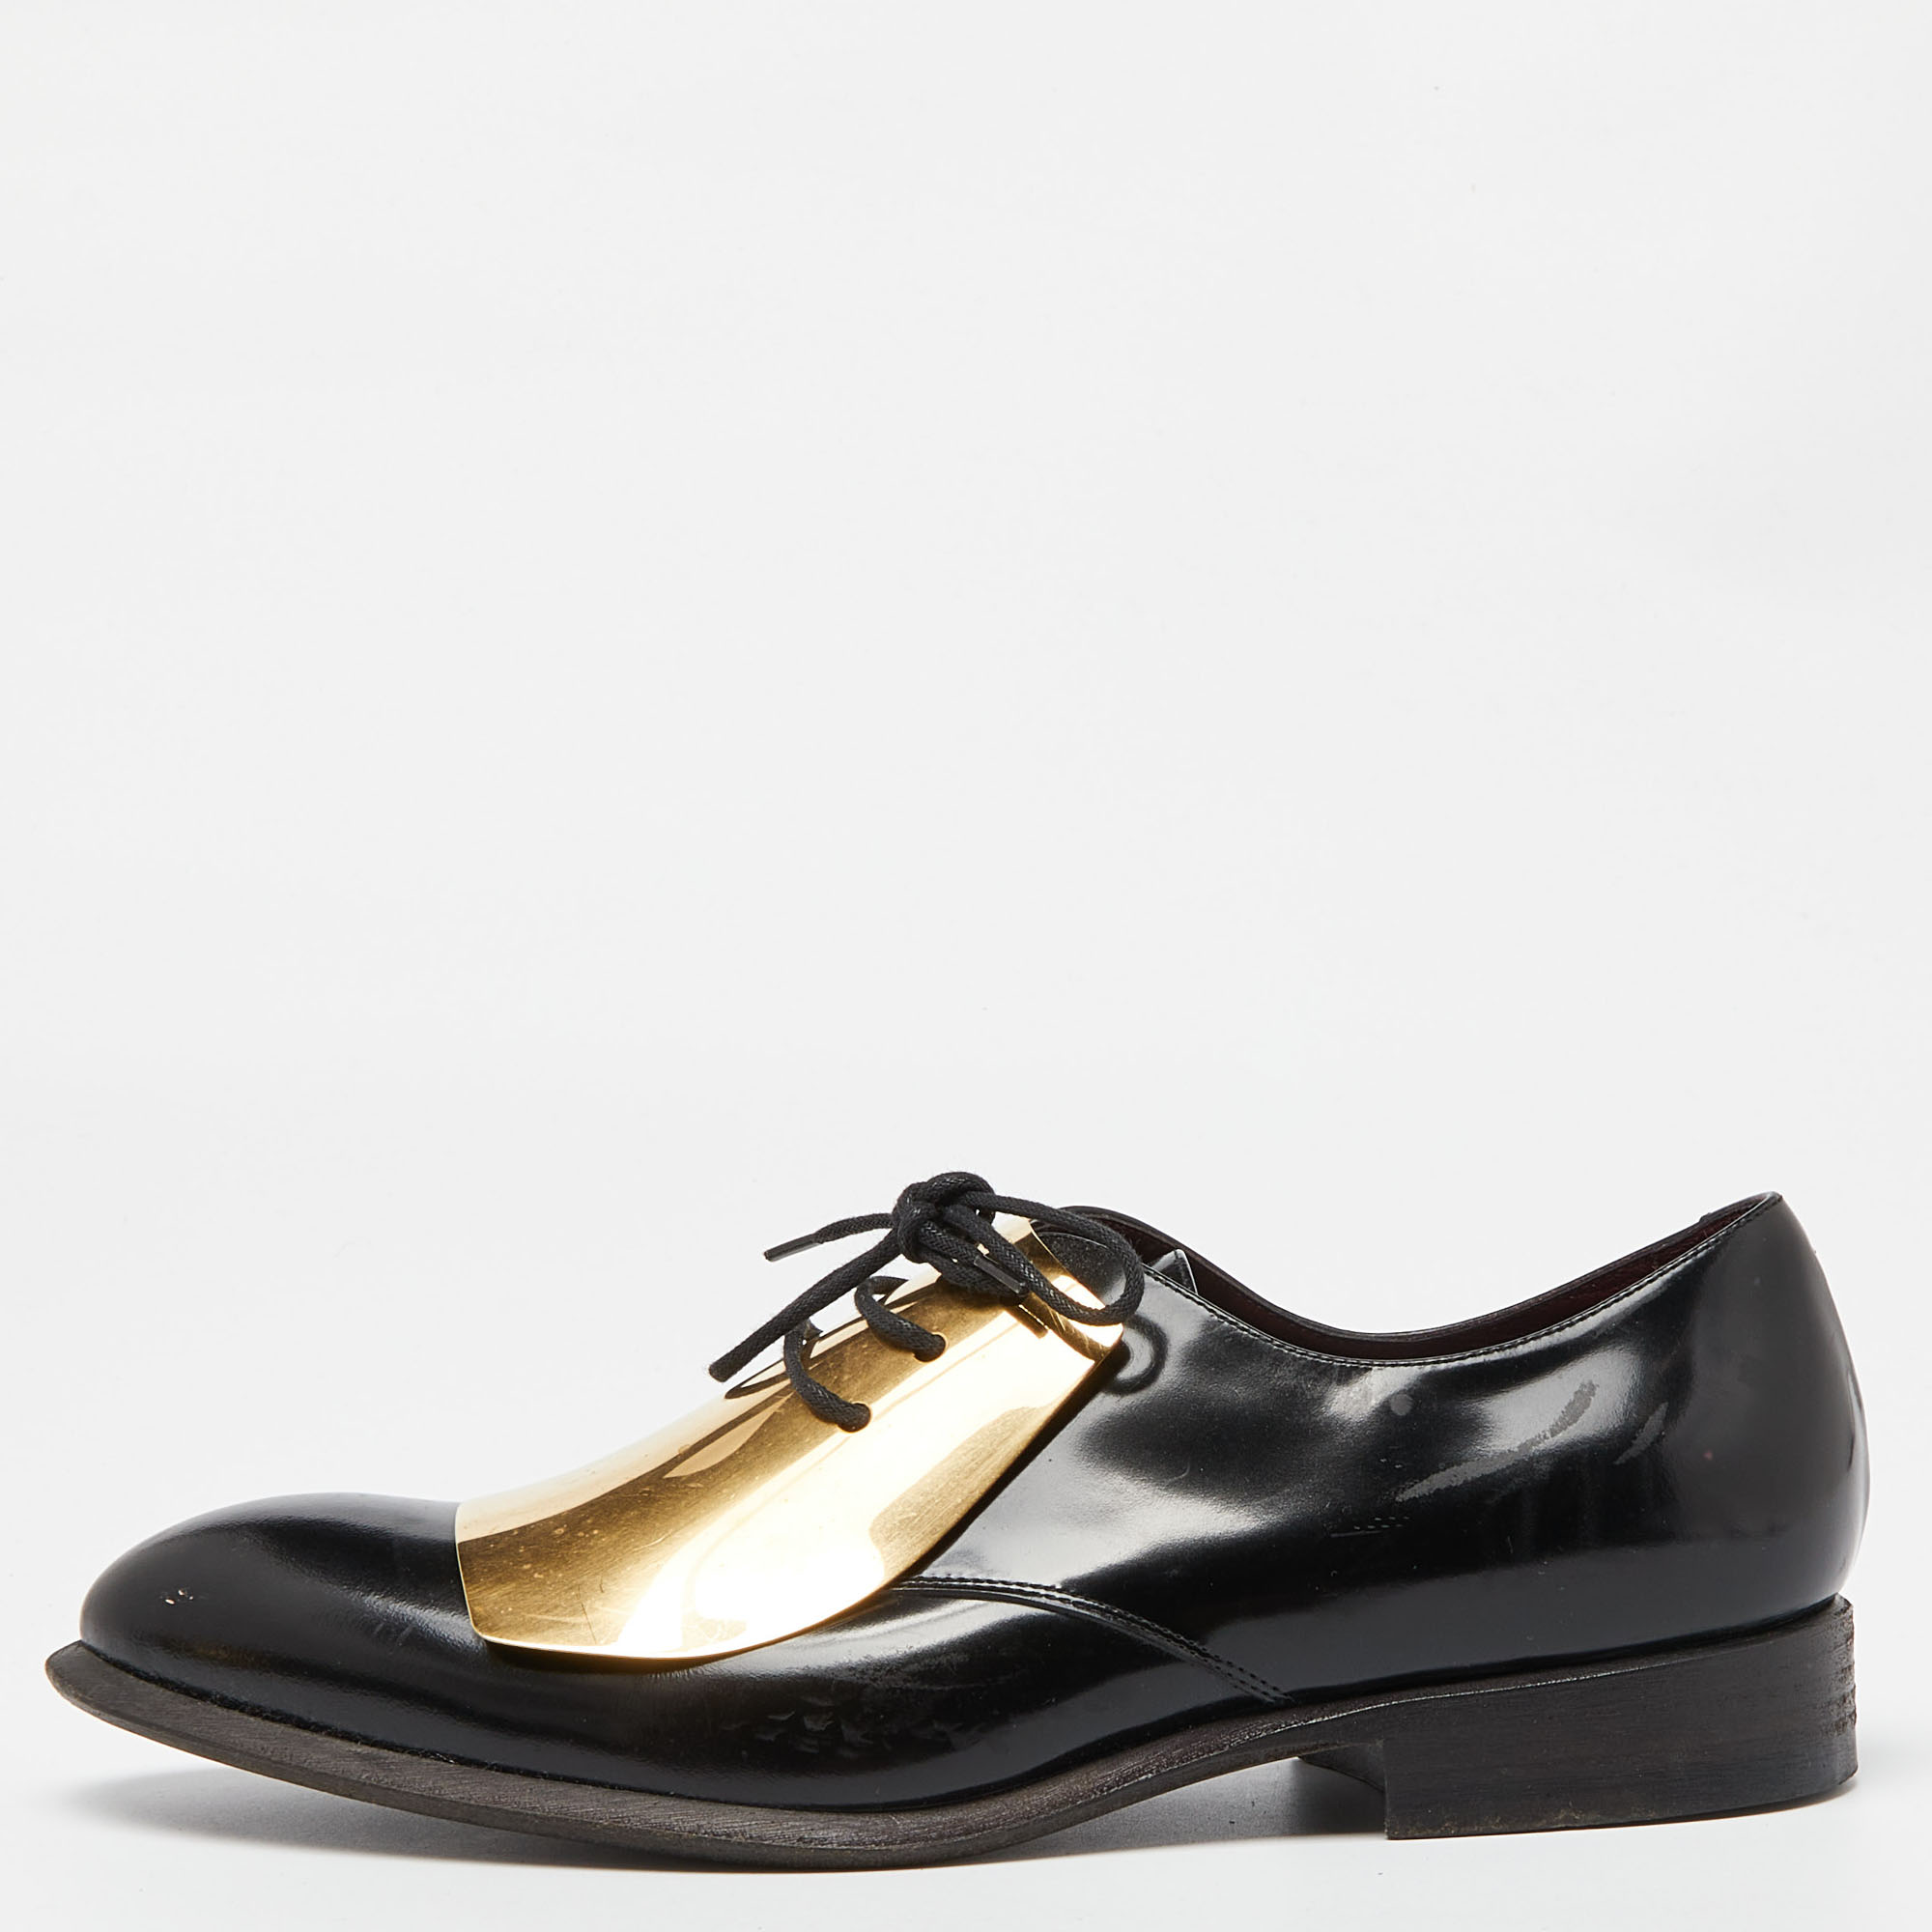 Celine black patent leather gold metal plate lace up oxfords size 39